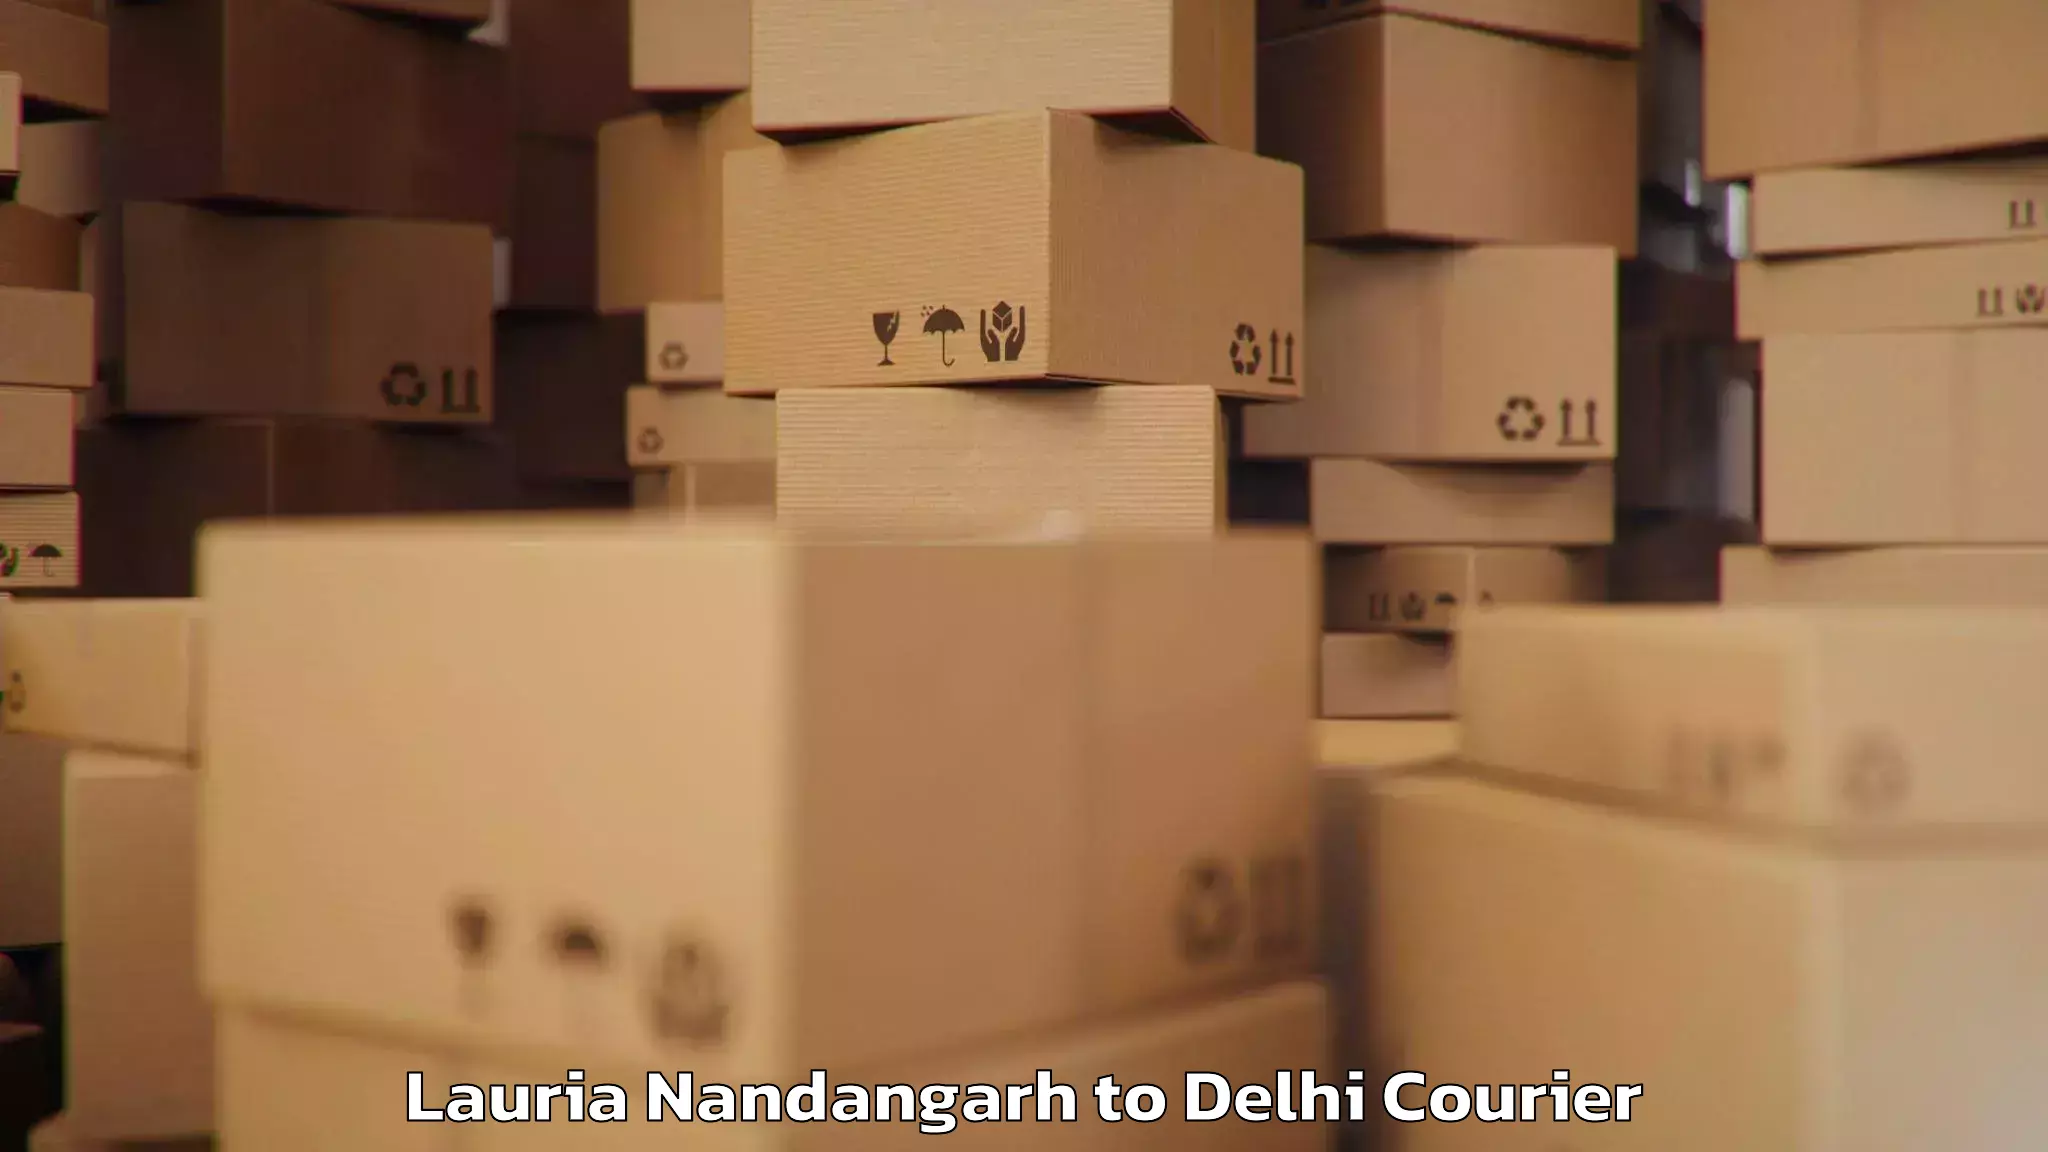 Online luggage shipping booking Lauria Nandangarh to Delhi